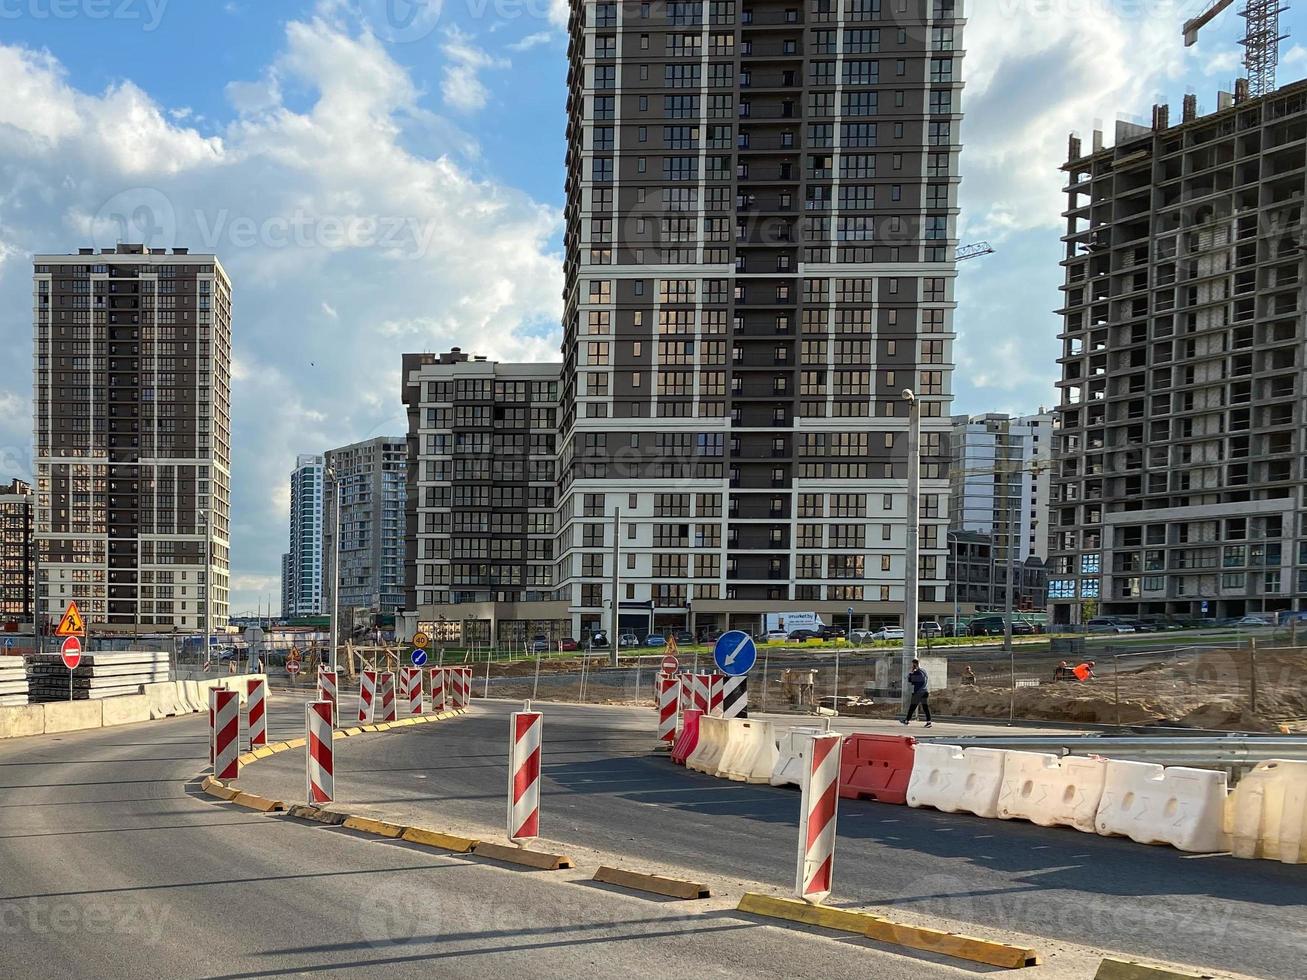 Repair and construction of a road with temporary road signs and cones against the background of beautiful tall new buildings against the background of blue sky and rainbow in a big city photo